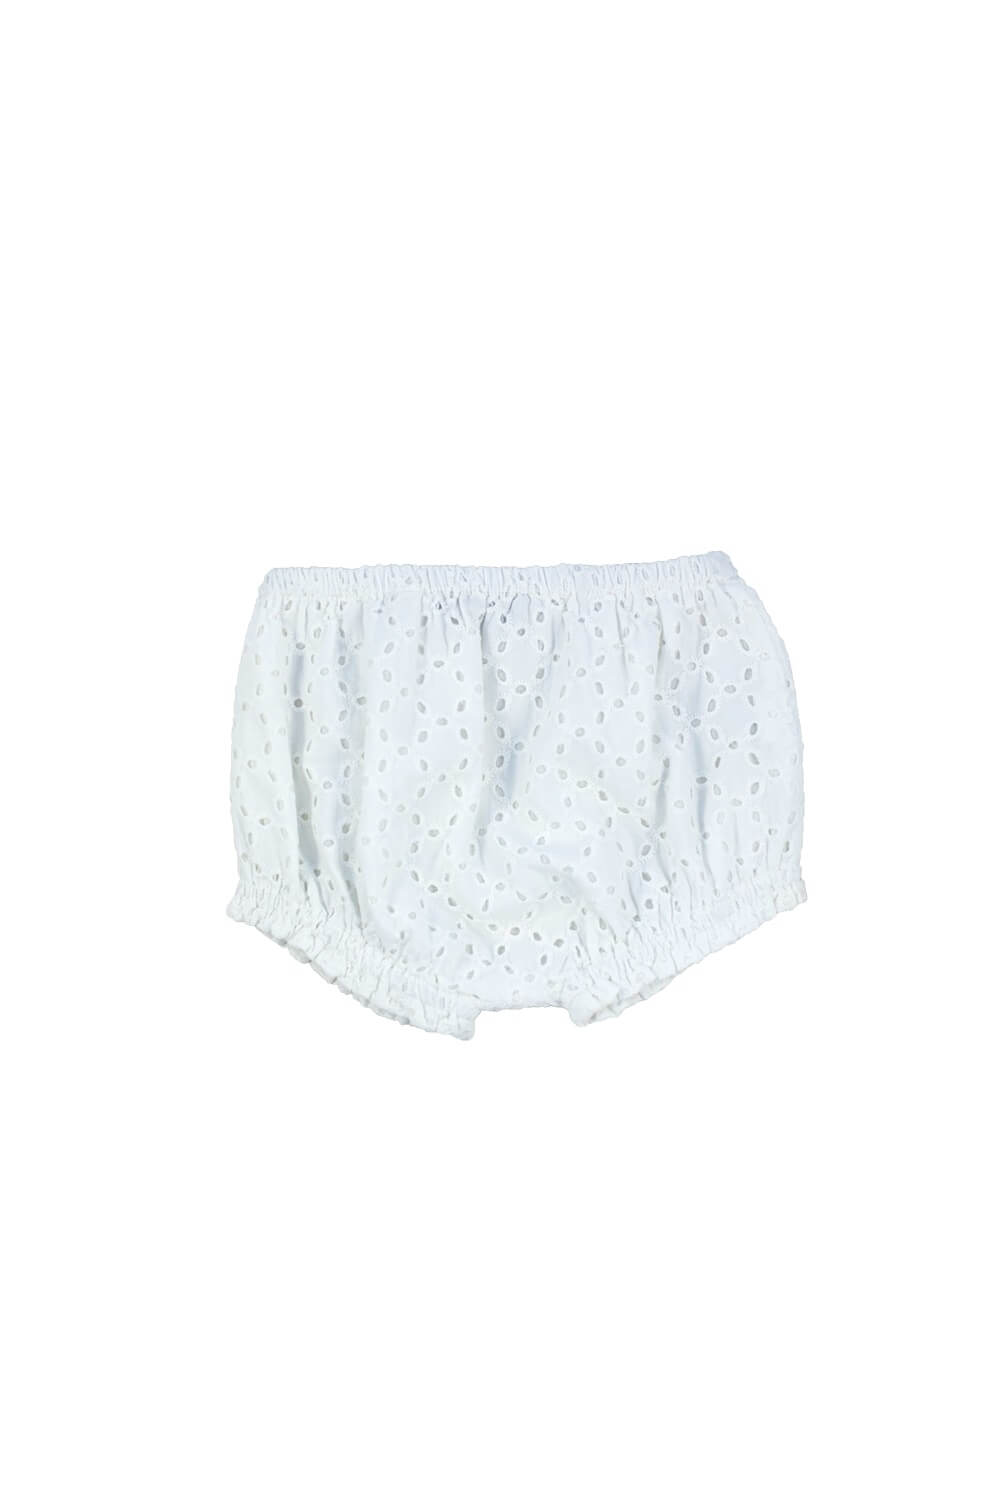 BeeBoo|BeeBoo Les petits Inclassables  Bloomer Emma broderie blanc